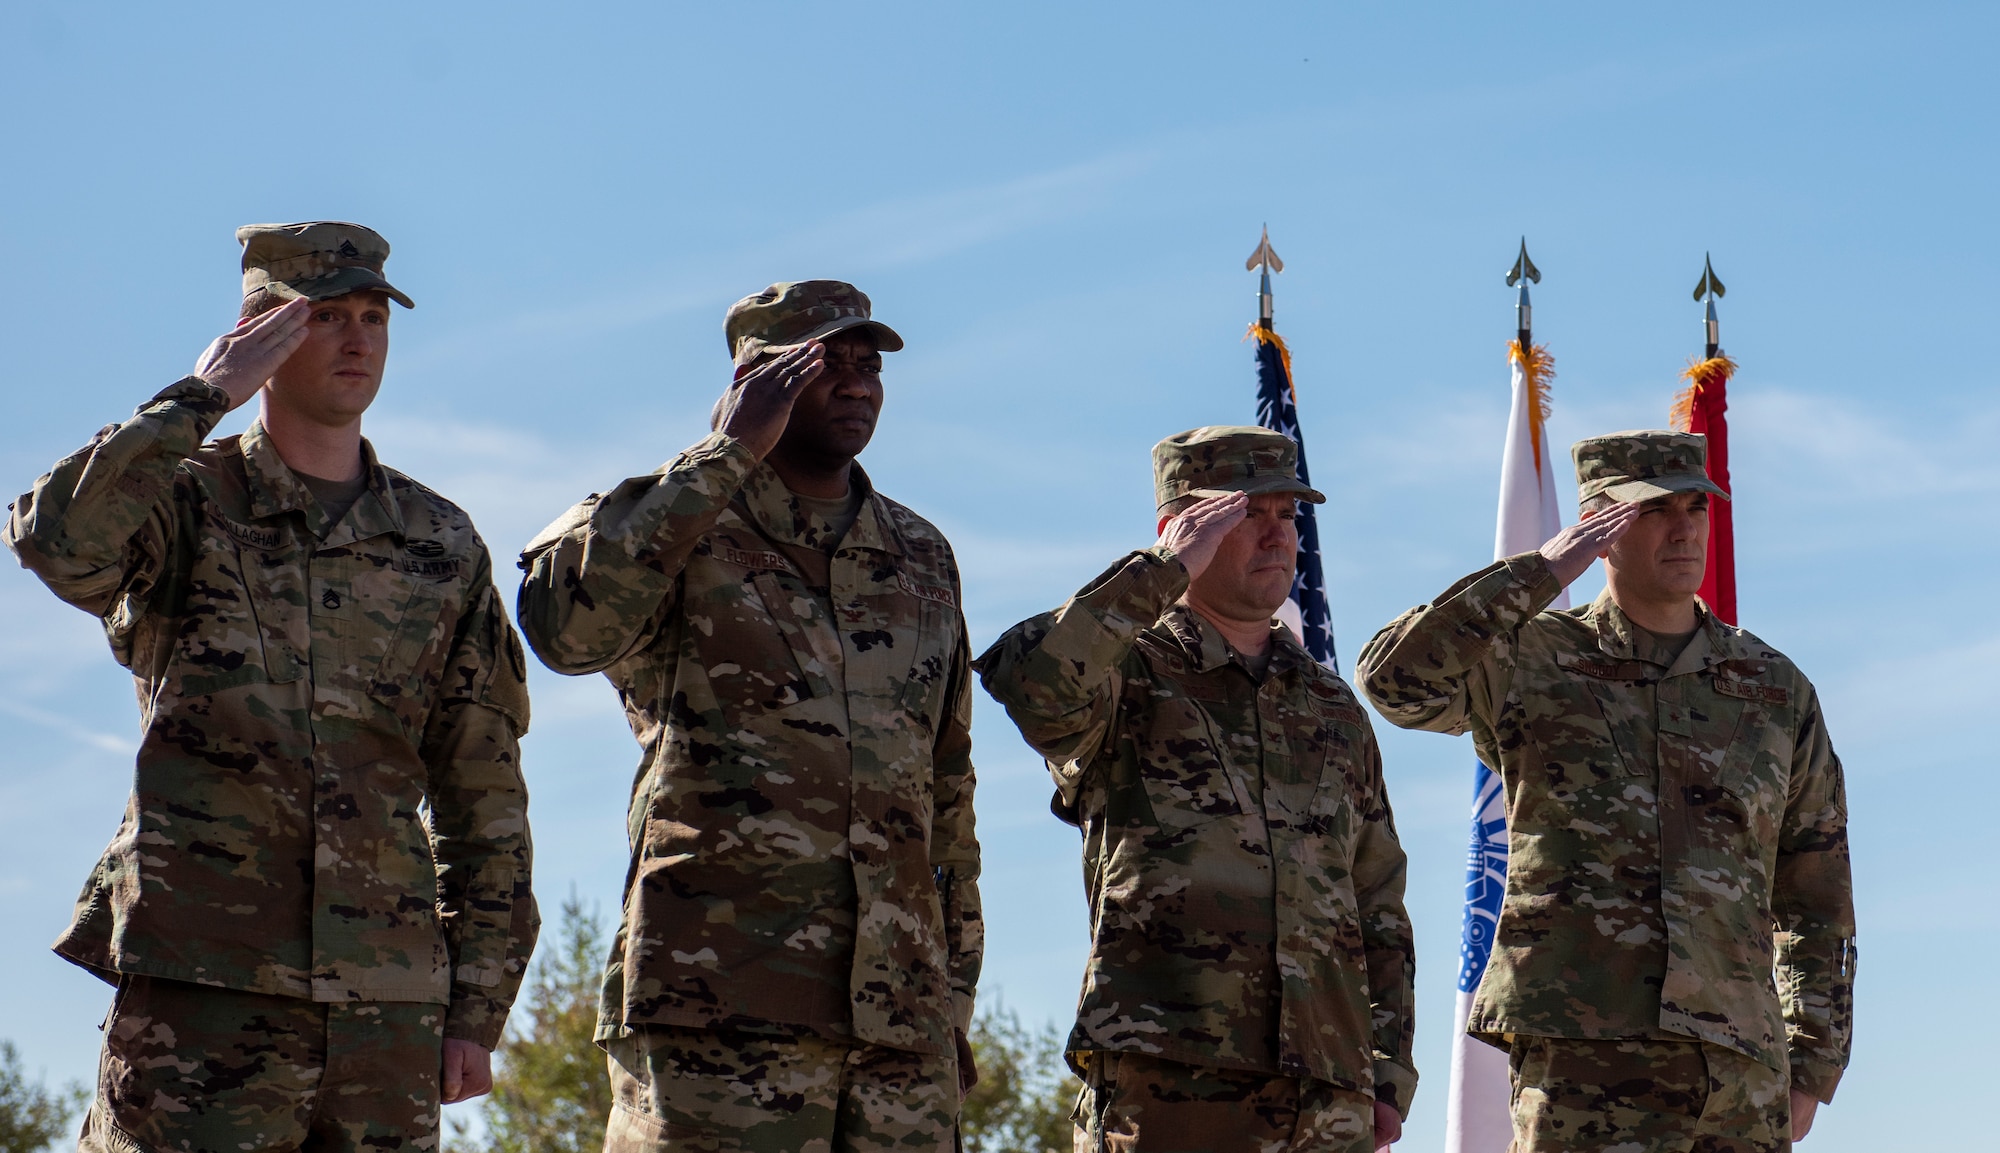 Members of Nellis leadership render a salute as the National Anthem plays during a ceremony celebrating the Mike O’Callaghan Military Medical Center’s 25th anniversary at Nellis Air Force Base, Nevada, Nov. 12, 2019. During a ceremony that was attended by base and community leadership, the MOMMC celebrated O’Callaghan and 25 years of operations. (U.S. Air Force photo by Senior Airman Kevin Tanenbaum)